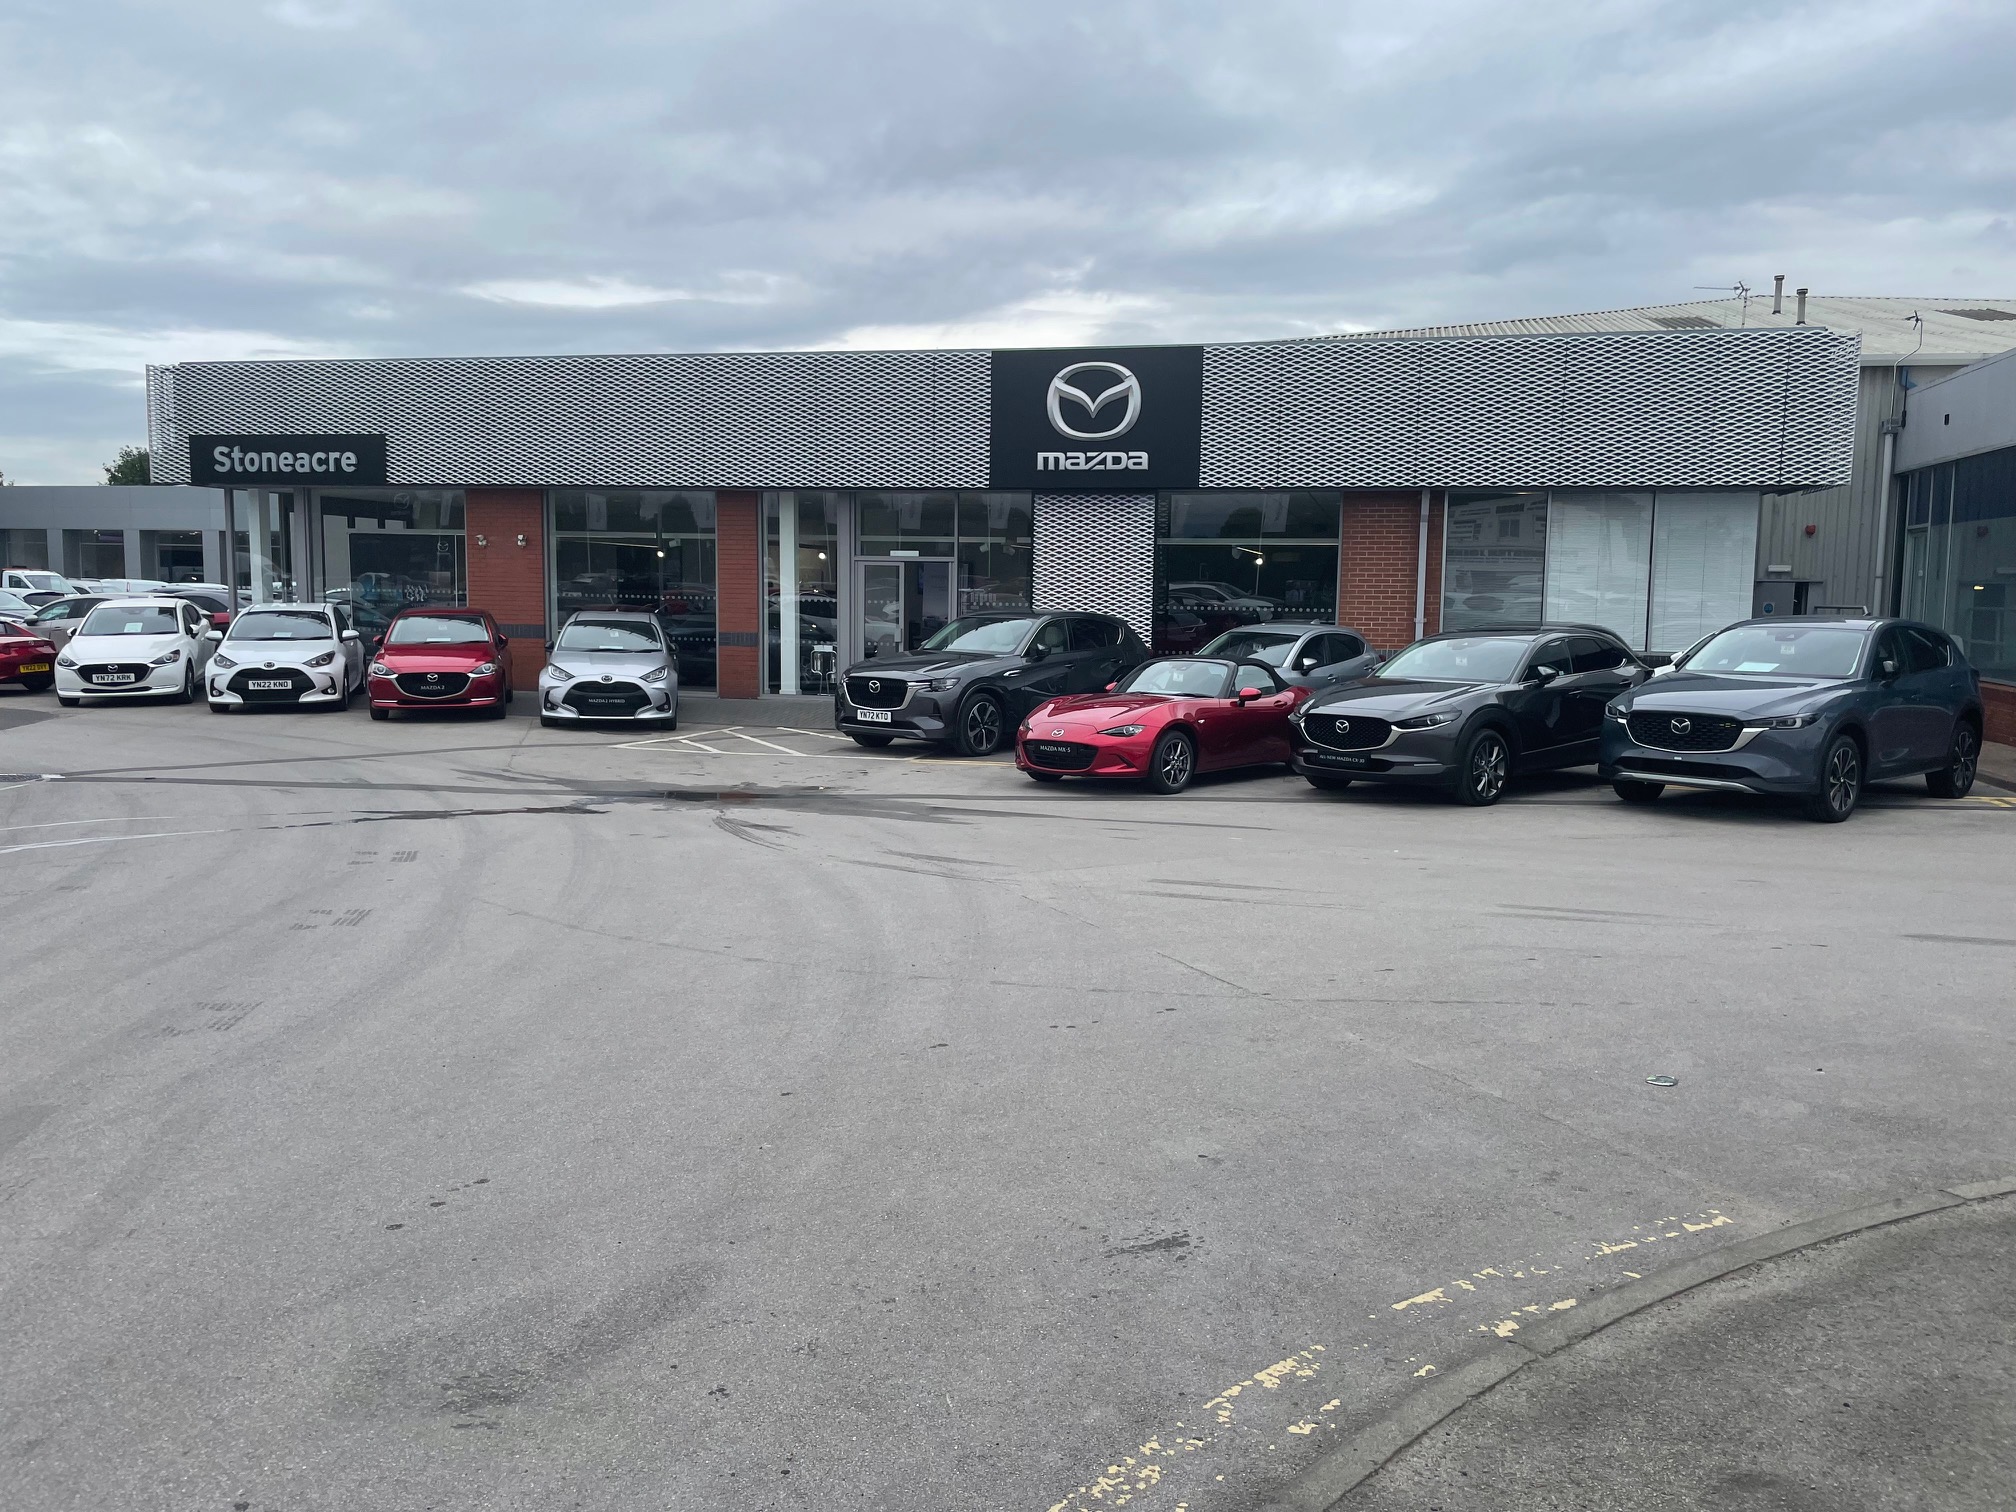 Mazda Doncaster - Doncaster, South Yorkshire DN5 8TW - 01302 493410 | ShowMeLocal.com